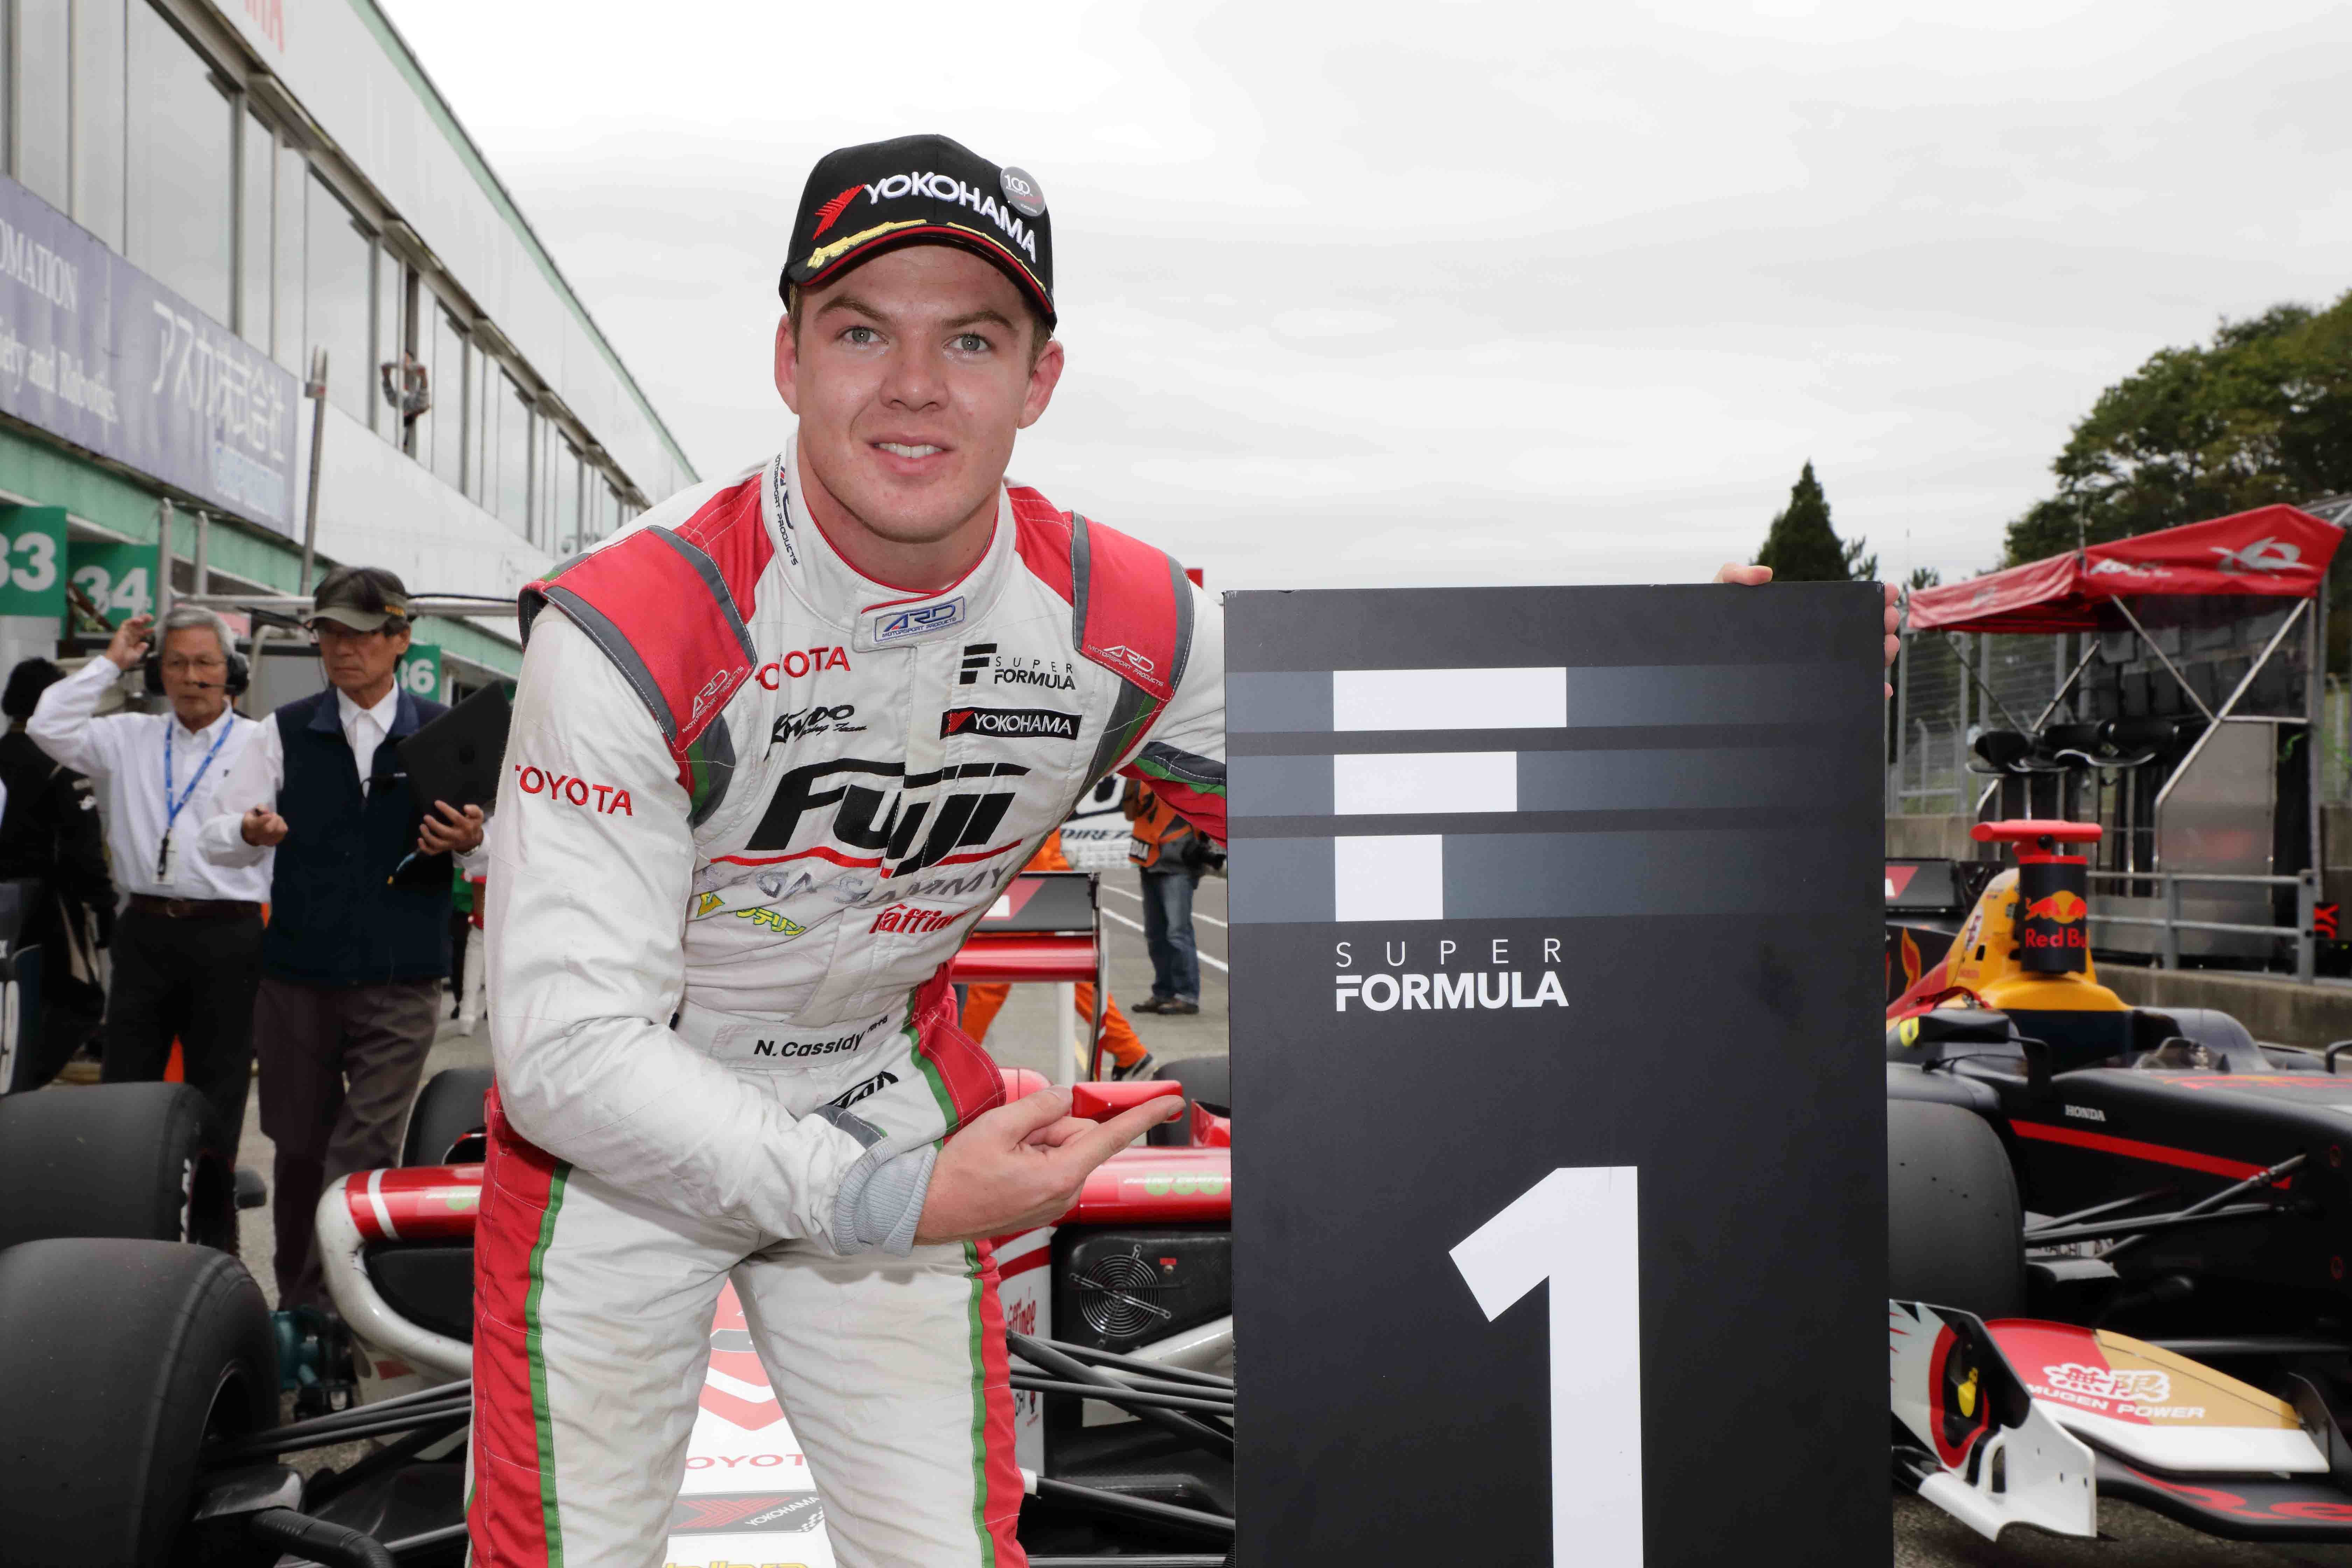 Super Formula: Anticlimax for polesitter Cassidy with pre-race electrical issue